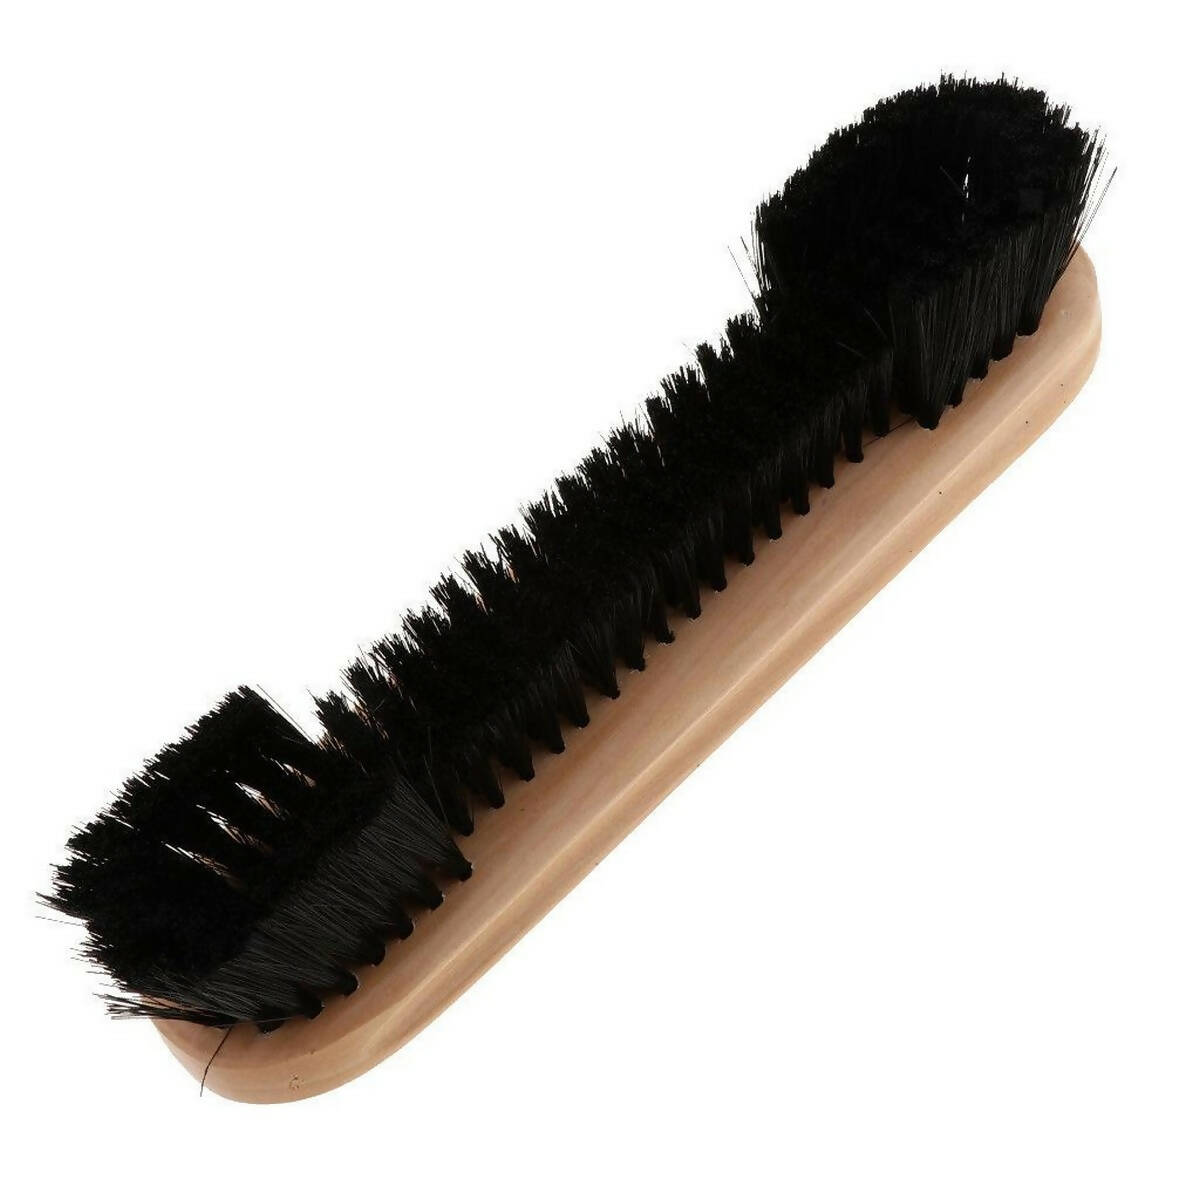 12 Inch Wooden Brush for Snooker Billiard Pool table